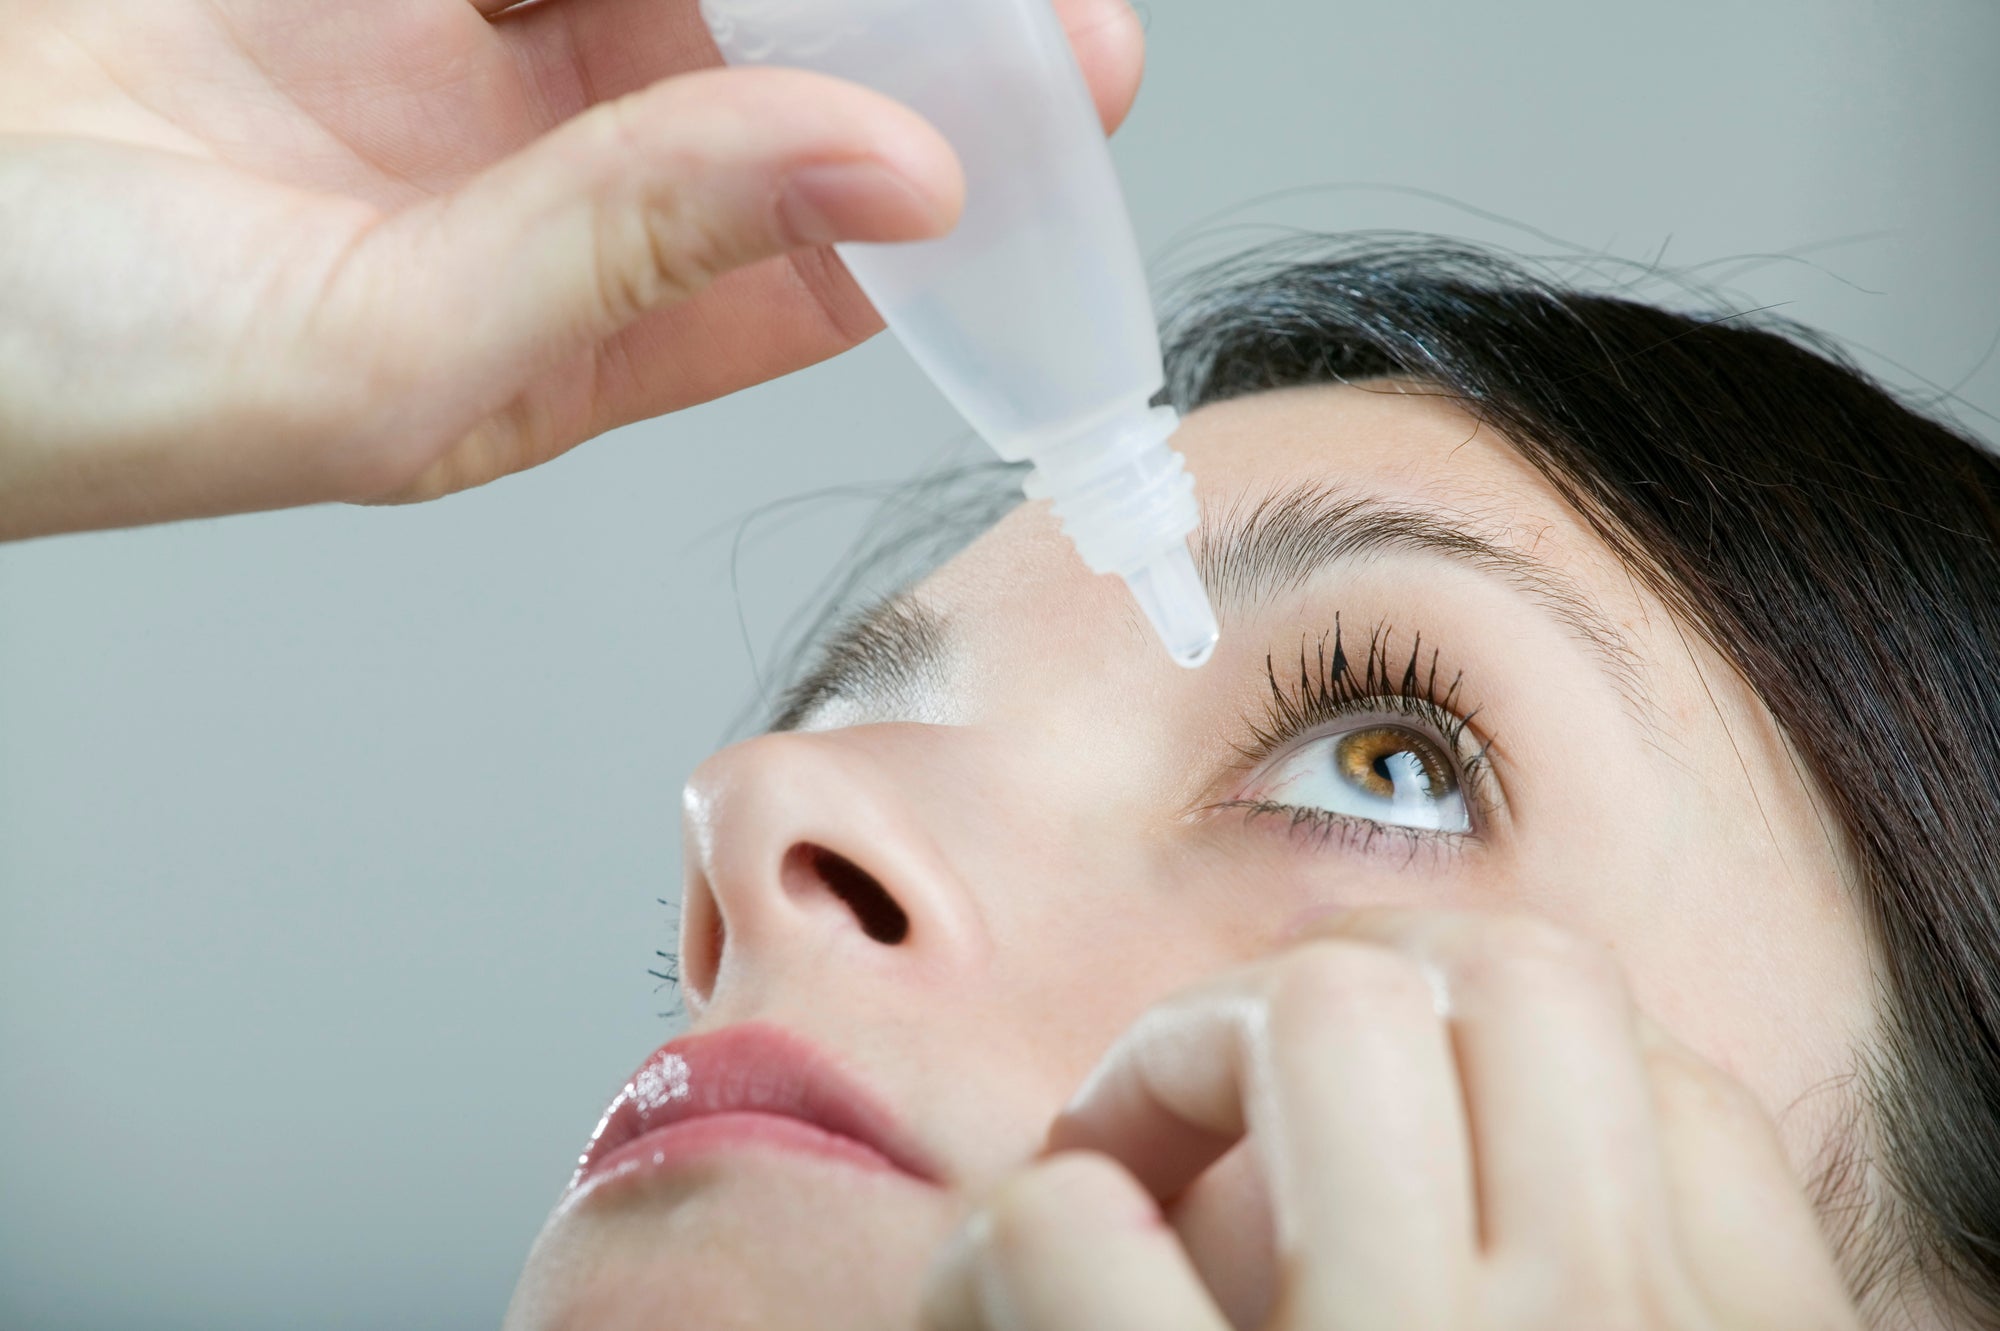 New Eyedrop Approved by FDA to Improve Vision